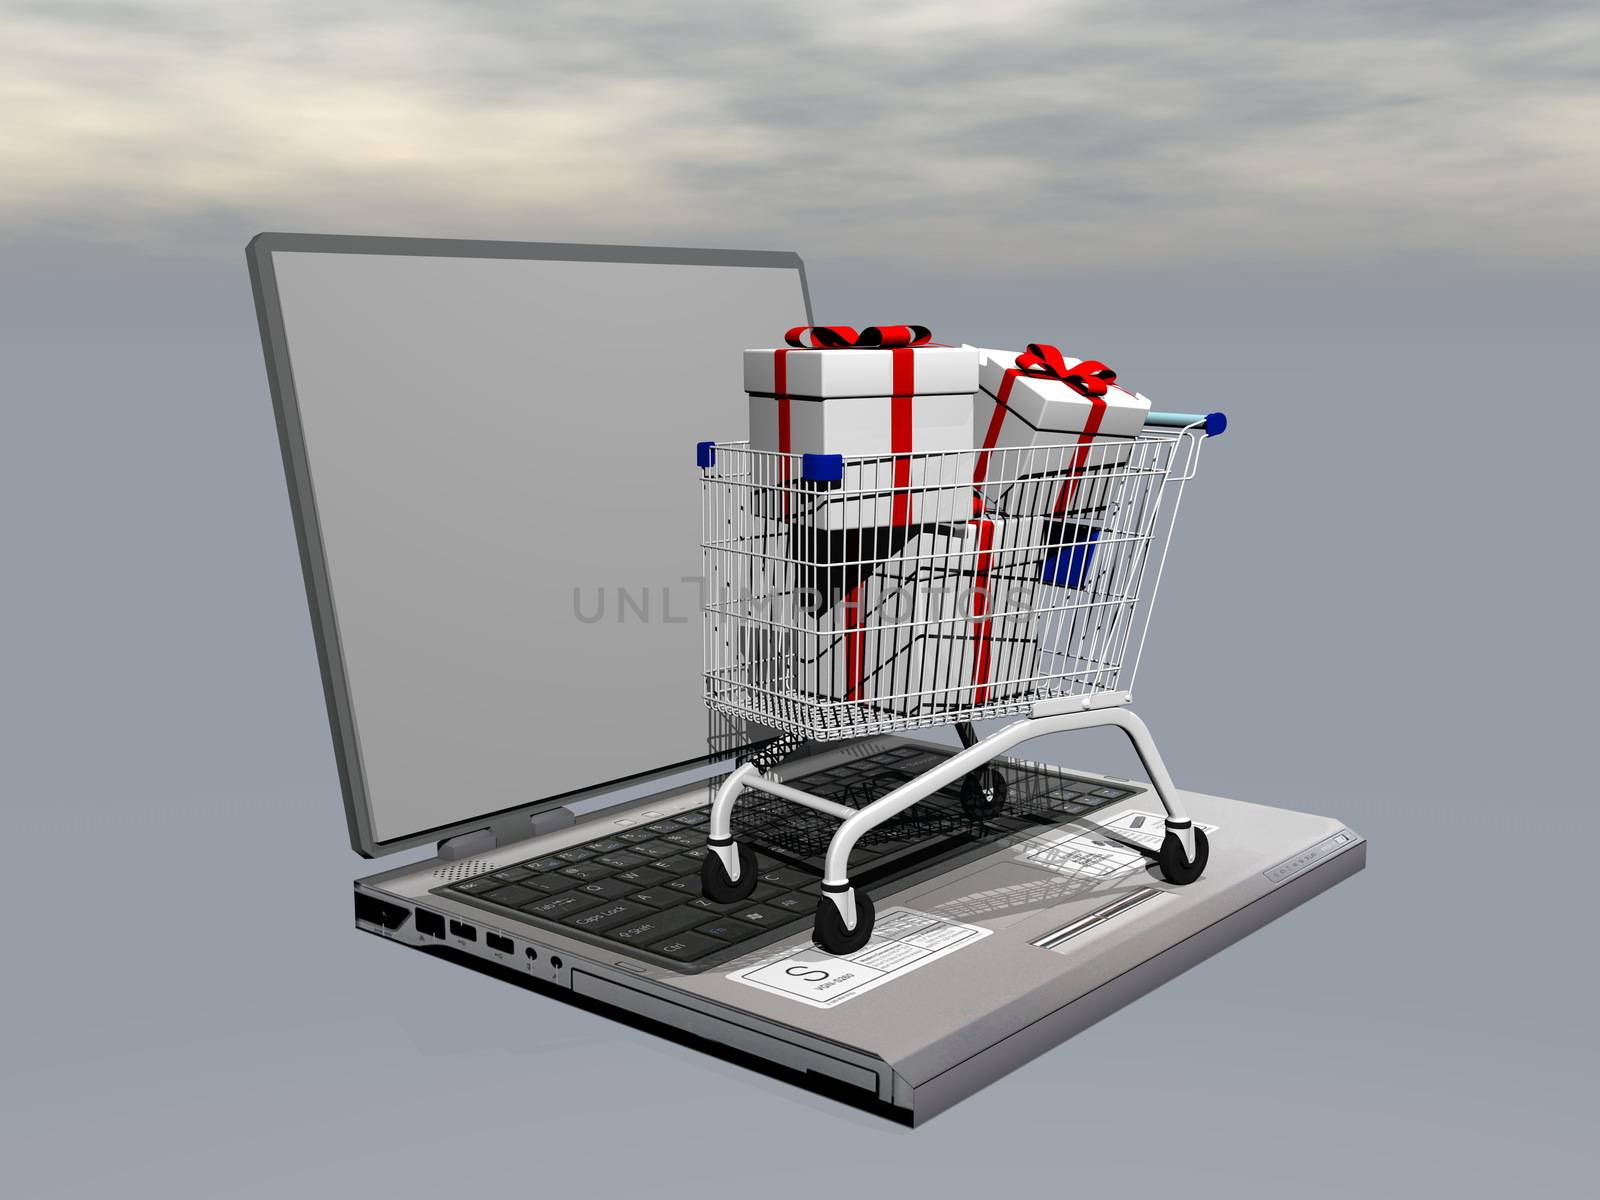 Shopping cart full of gifts on laptop symbolizing e-commerce to offer present in grey cloudy background